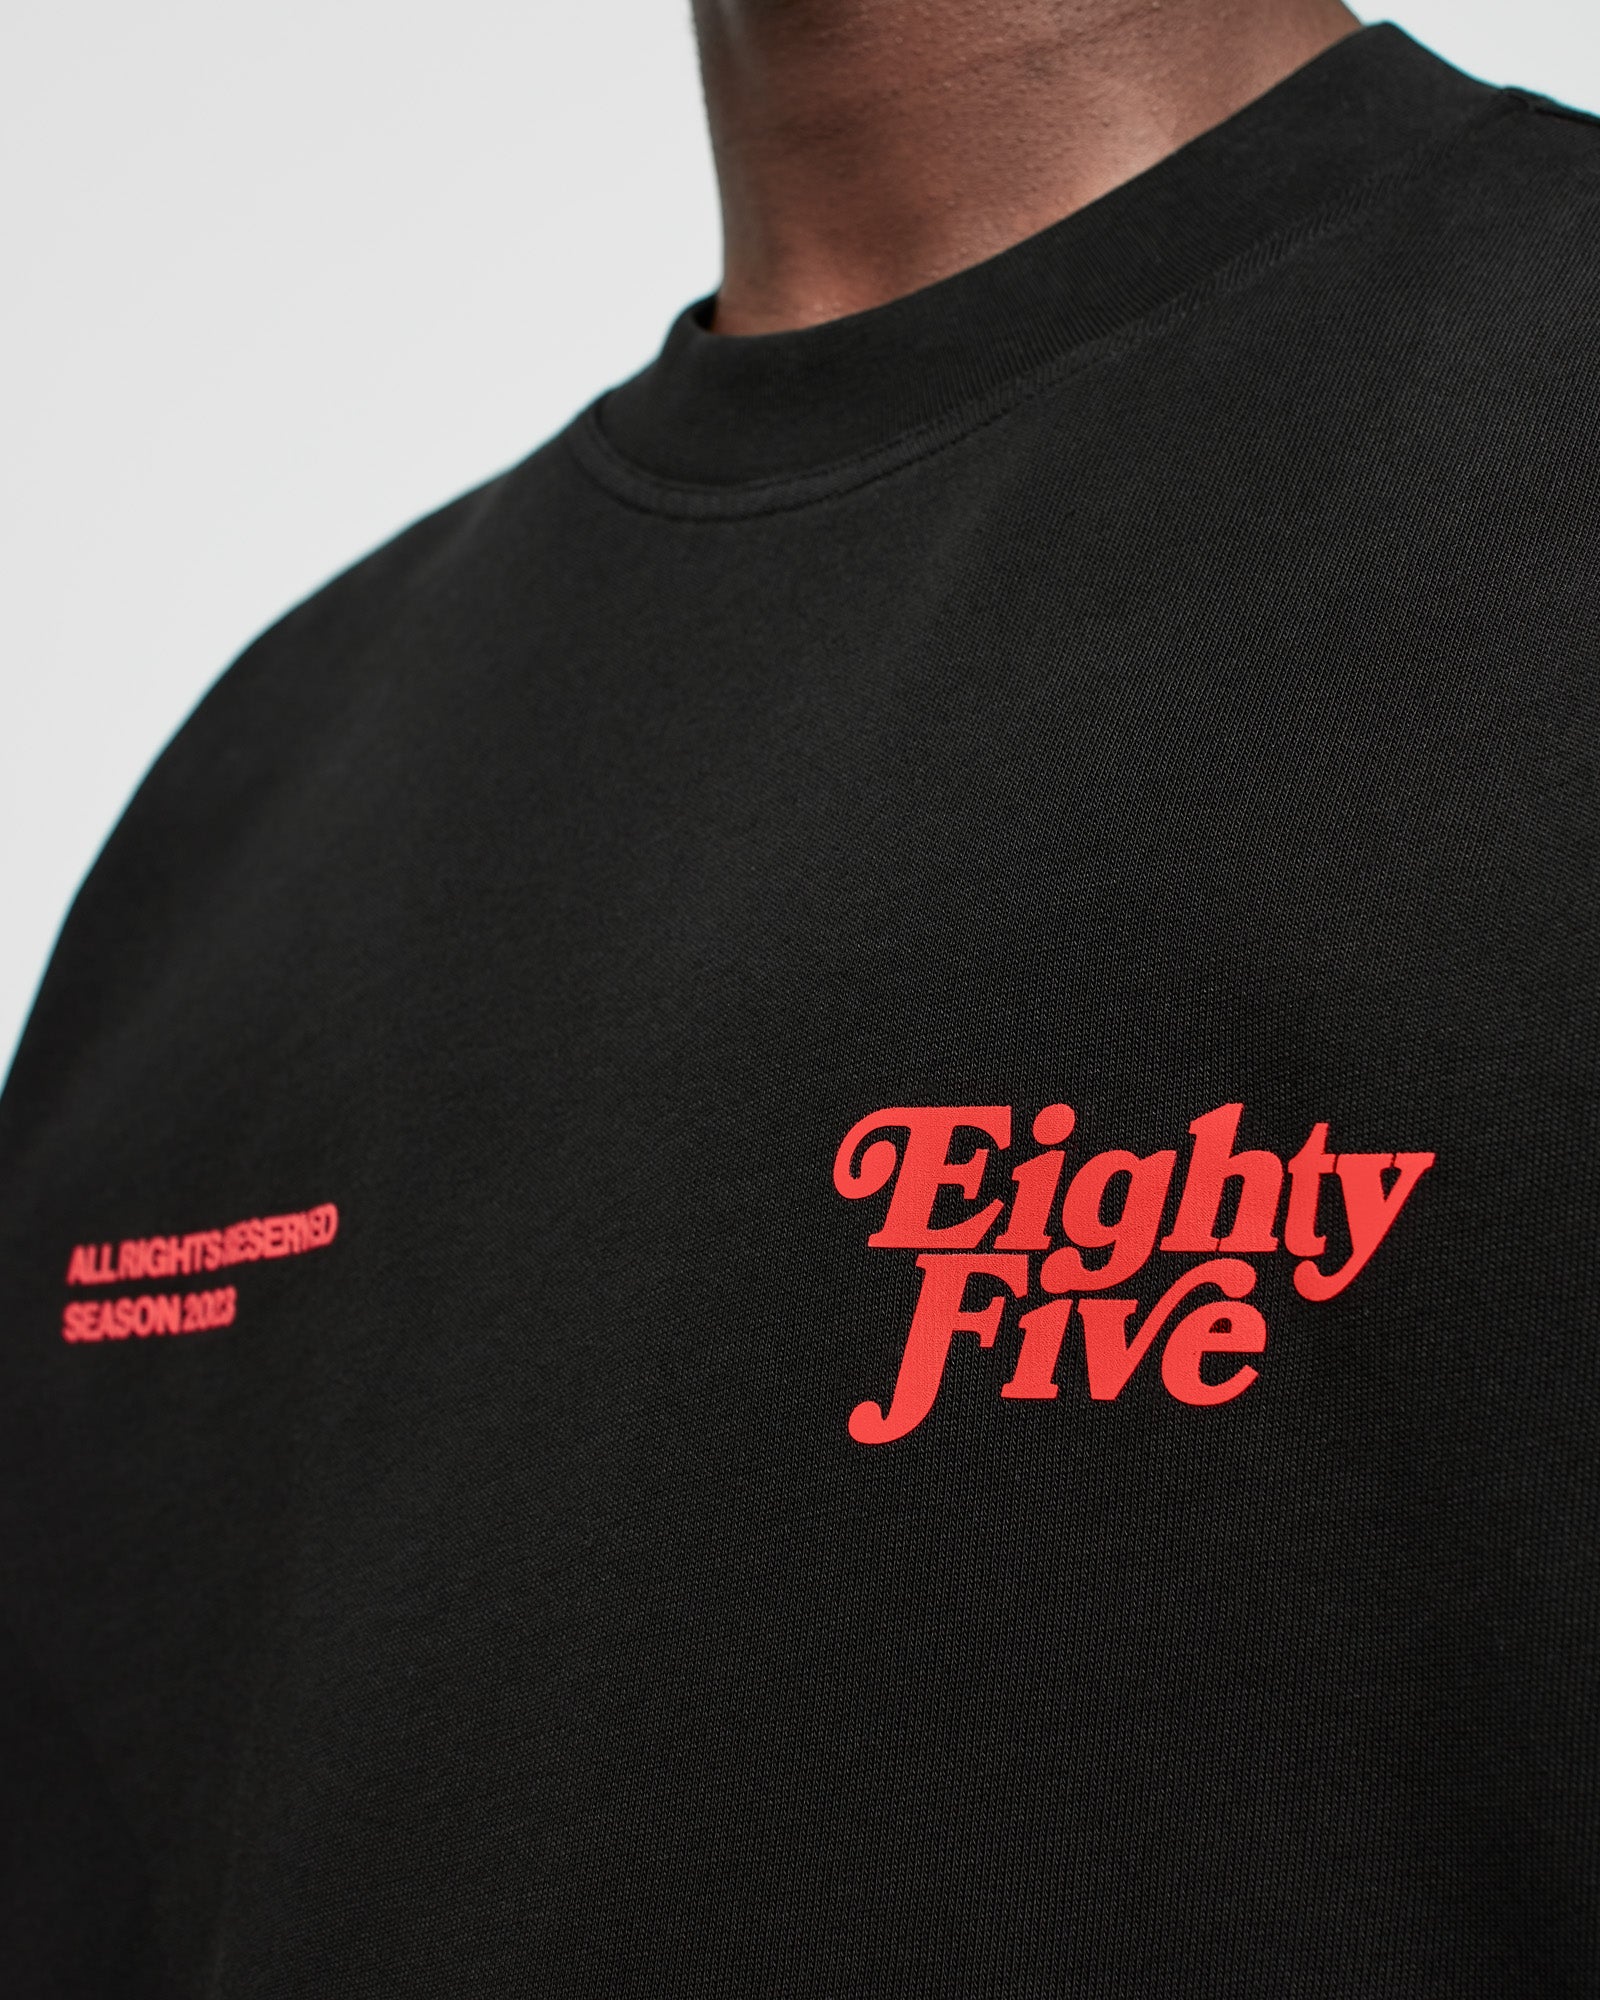 Heavy All Rights T-Shirt